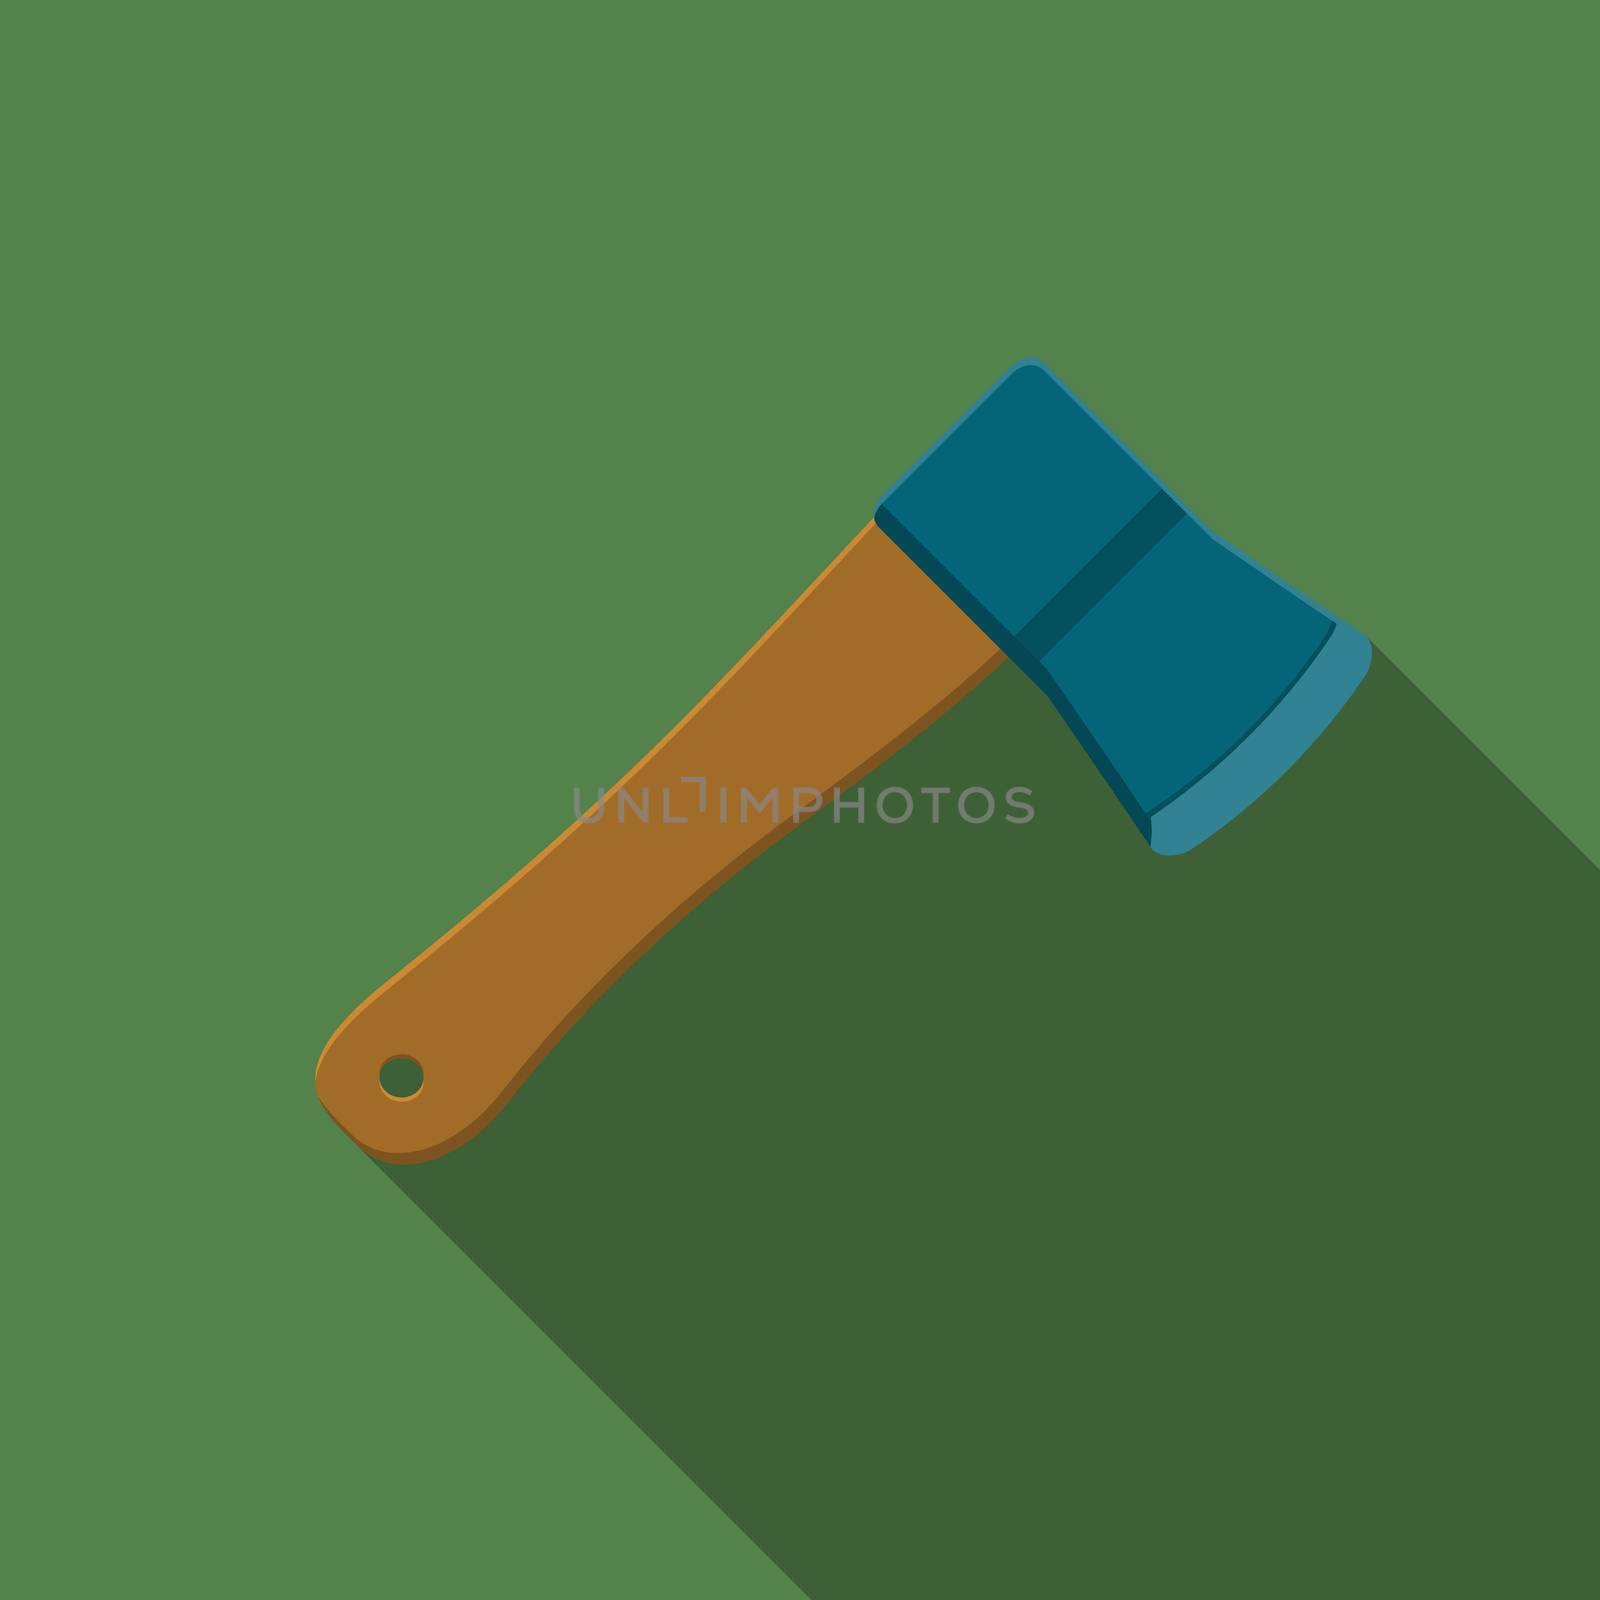 Flat design modern vector illustration of axe icon, camping and hiking equipment with long shadow by Lemon_workshop